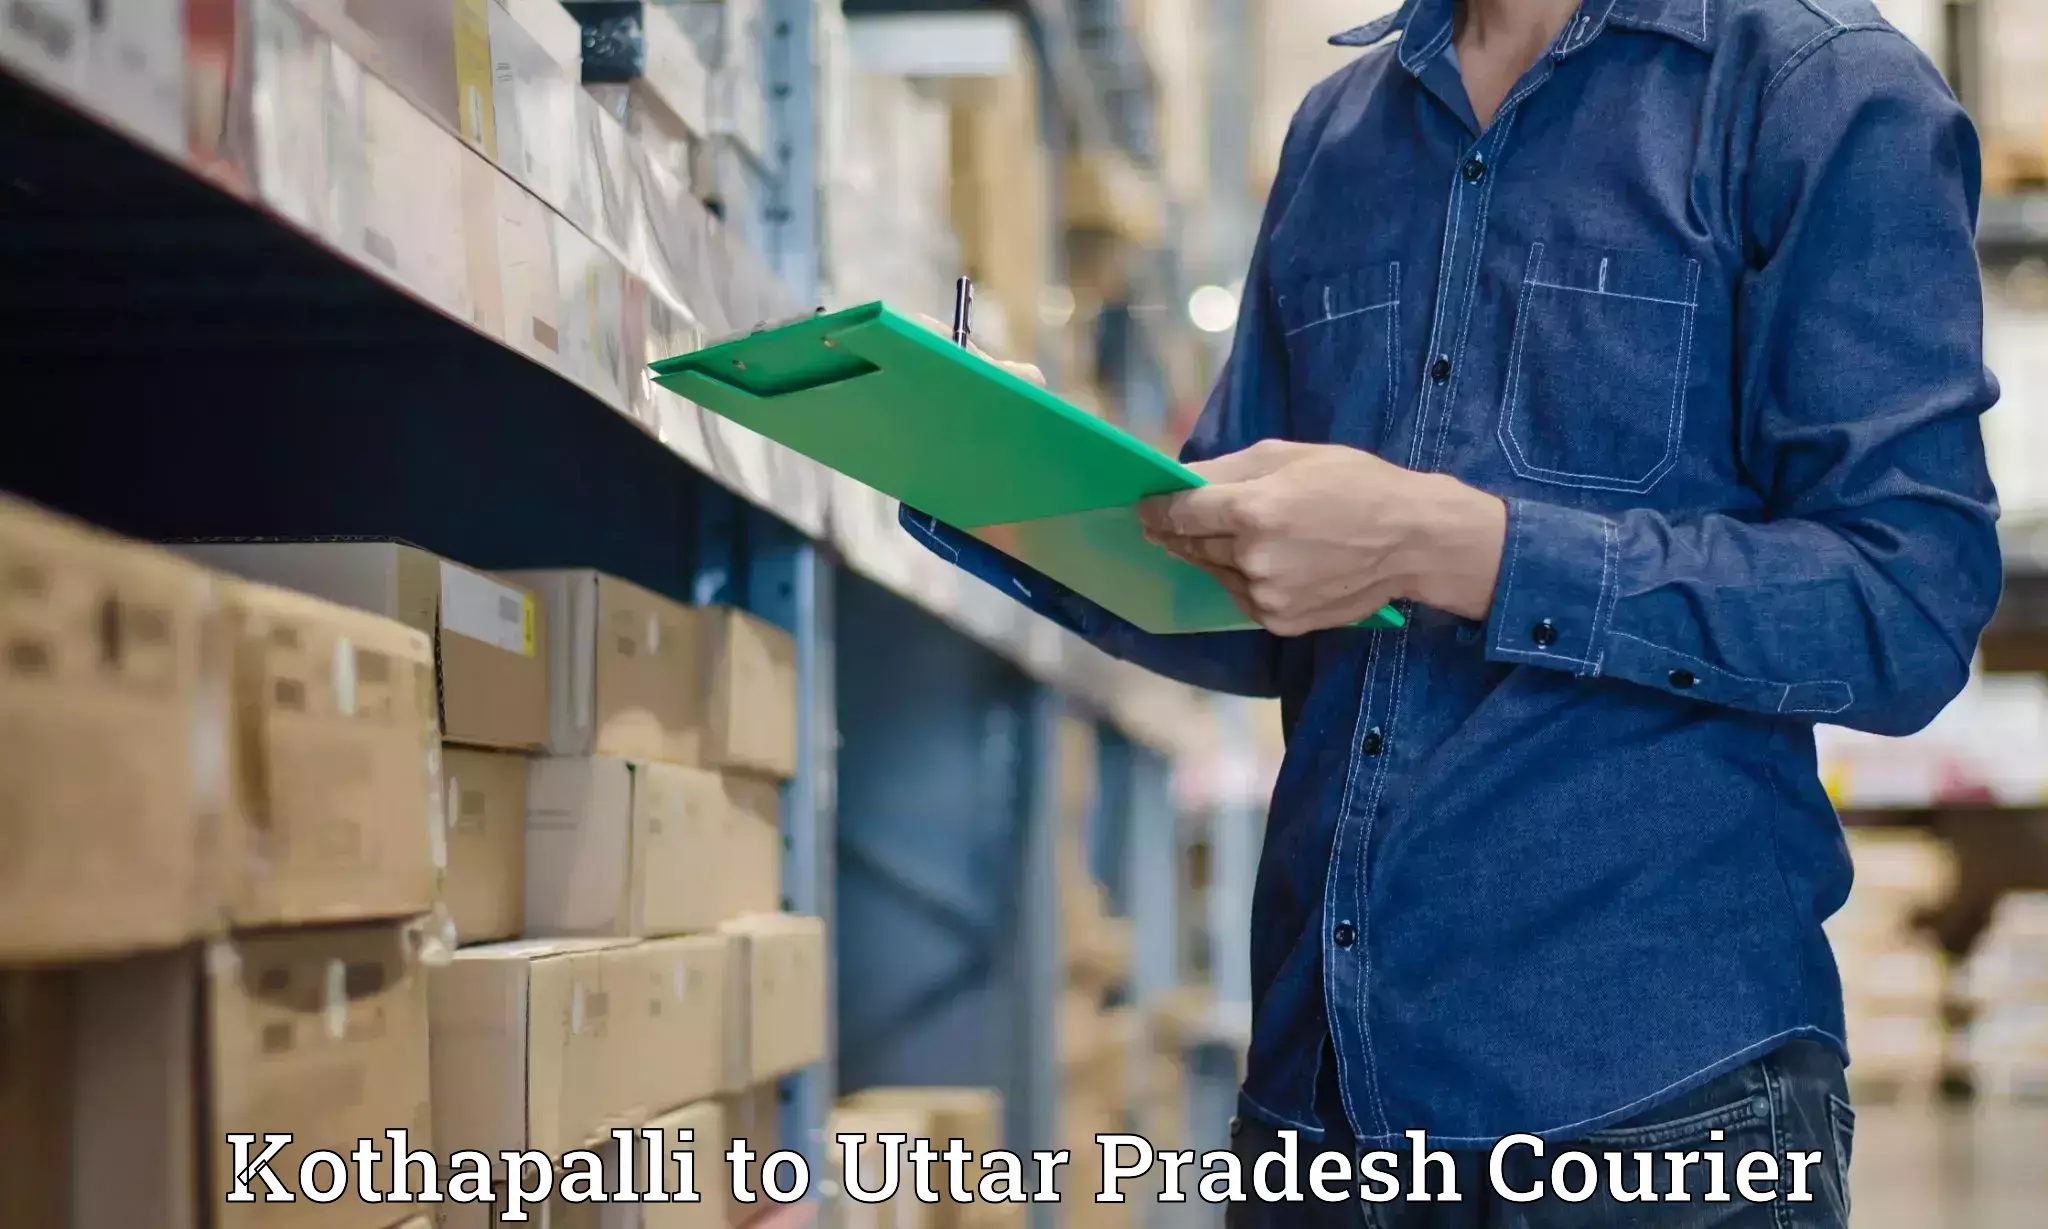 Business delivery service Kothapalli to Dadri